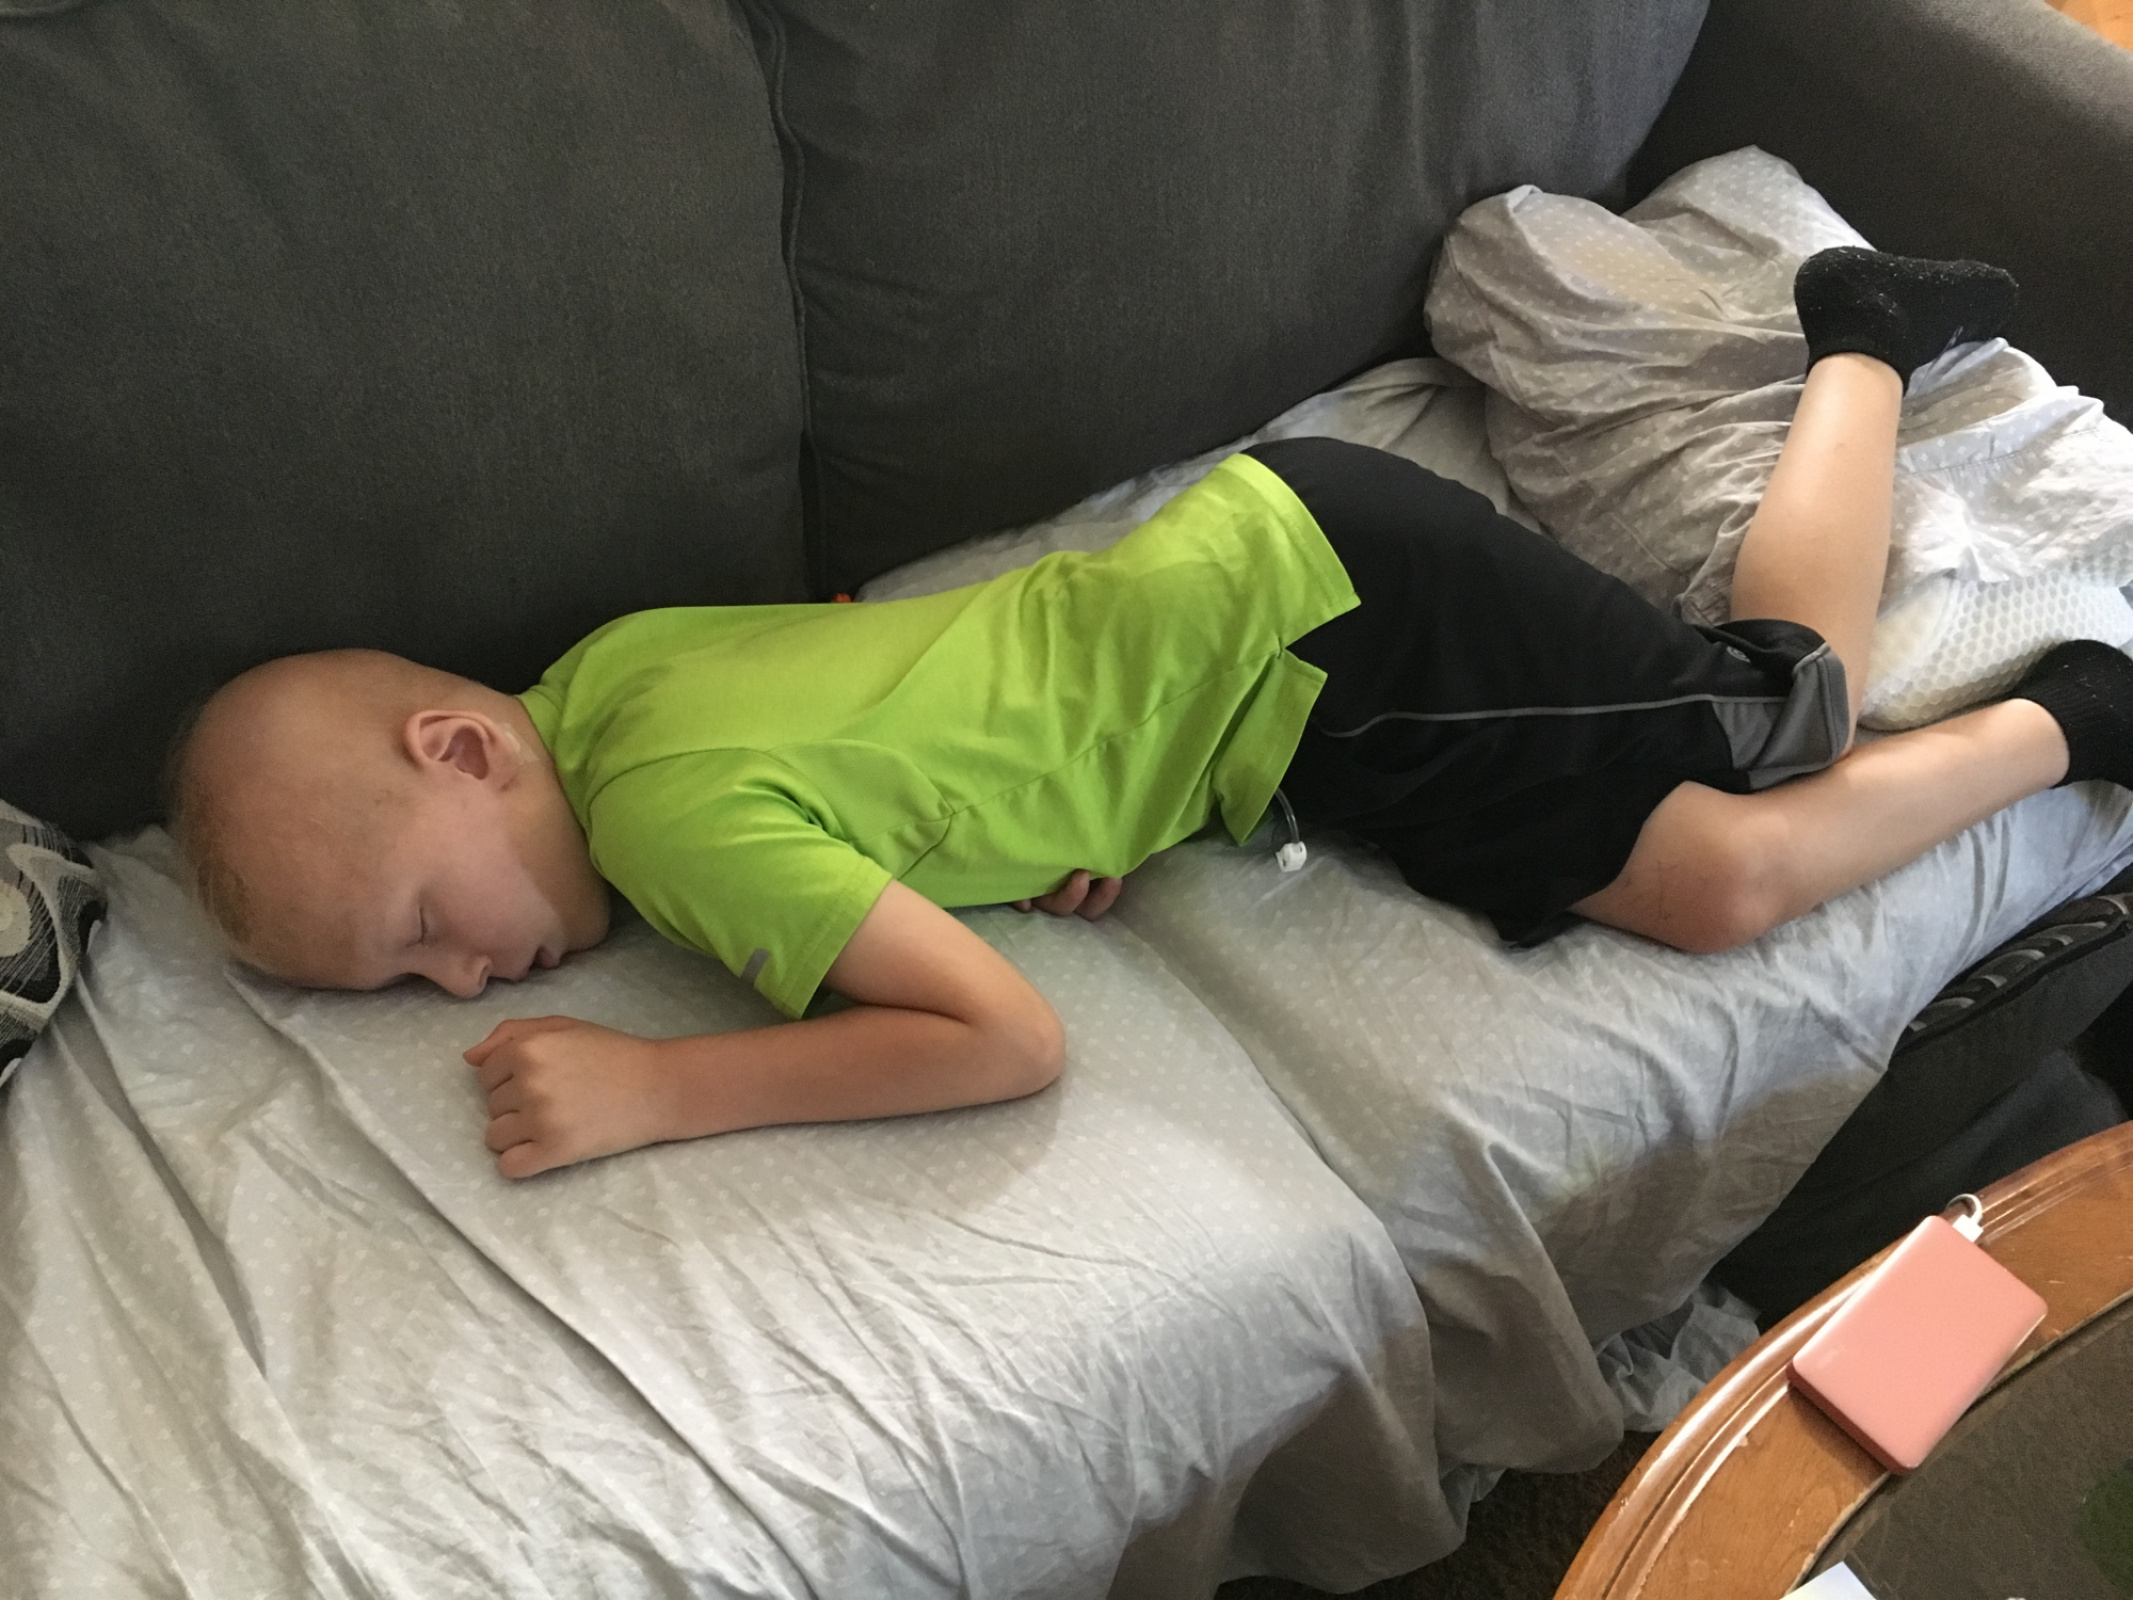 Conner said he was going to clean his Gtube site in order to watch tv. As he said this I was walking into our bedroom. When I came out I found him like this, zonked out on the couch.